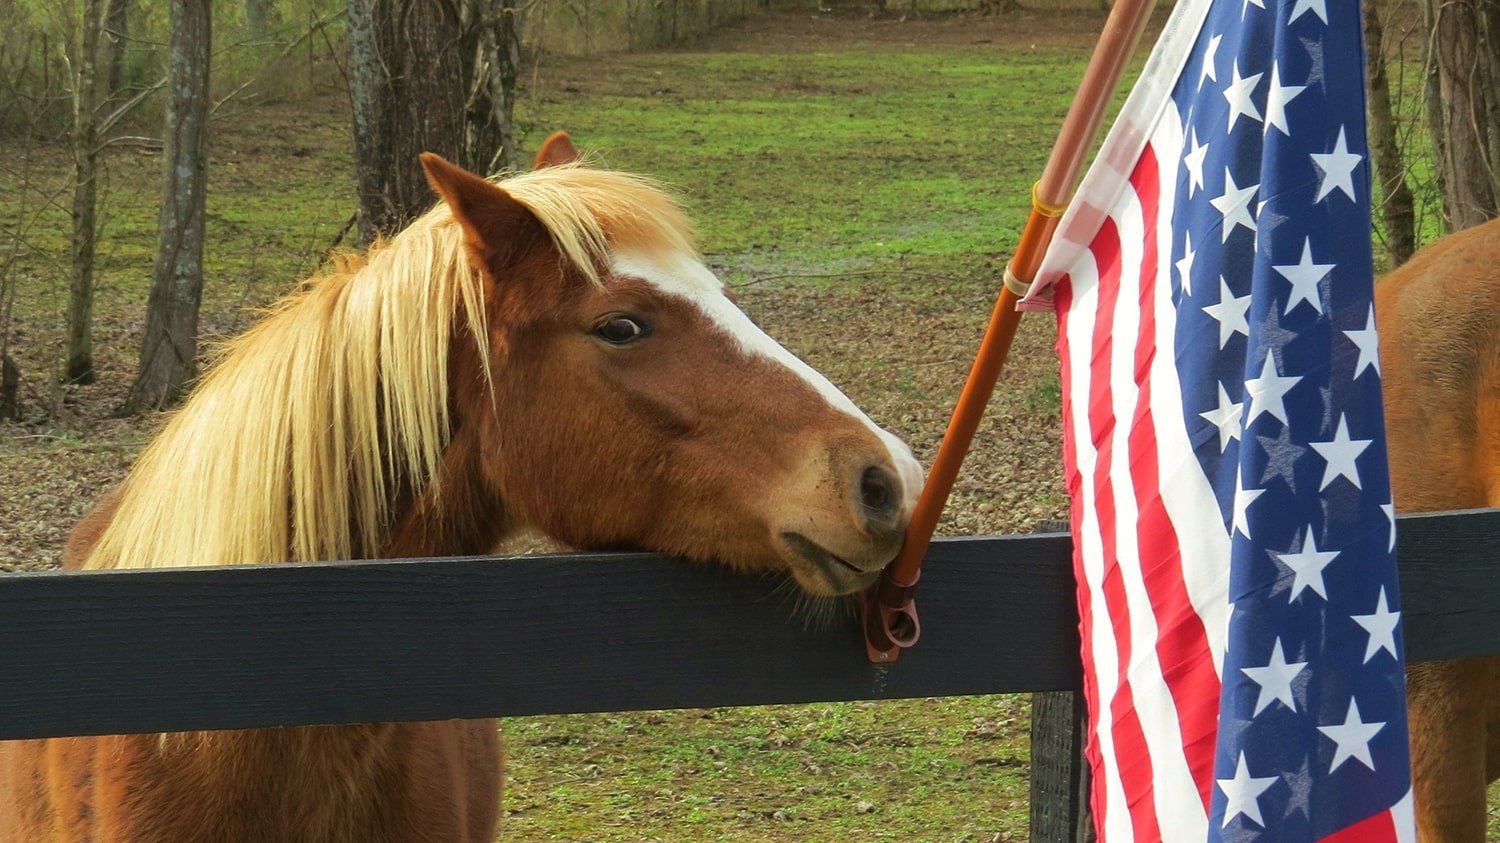 Horse standing next to fence with American flag